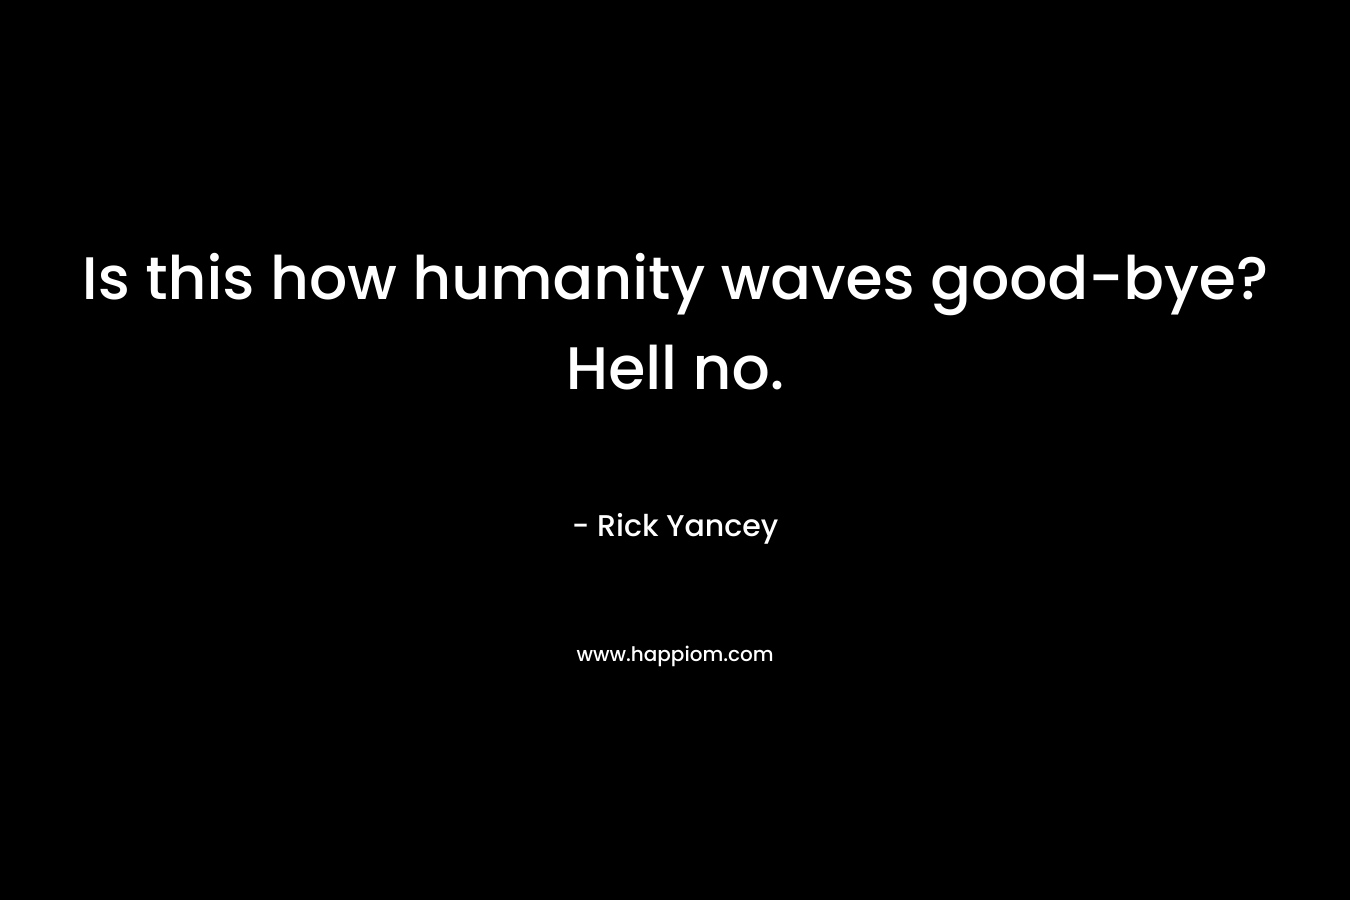 Is this how humanity waves good-bye?Hell no.